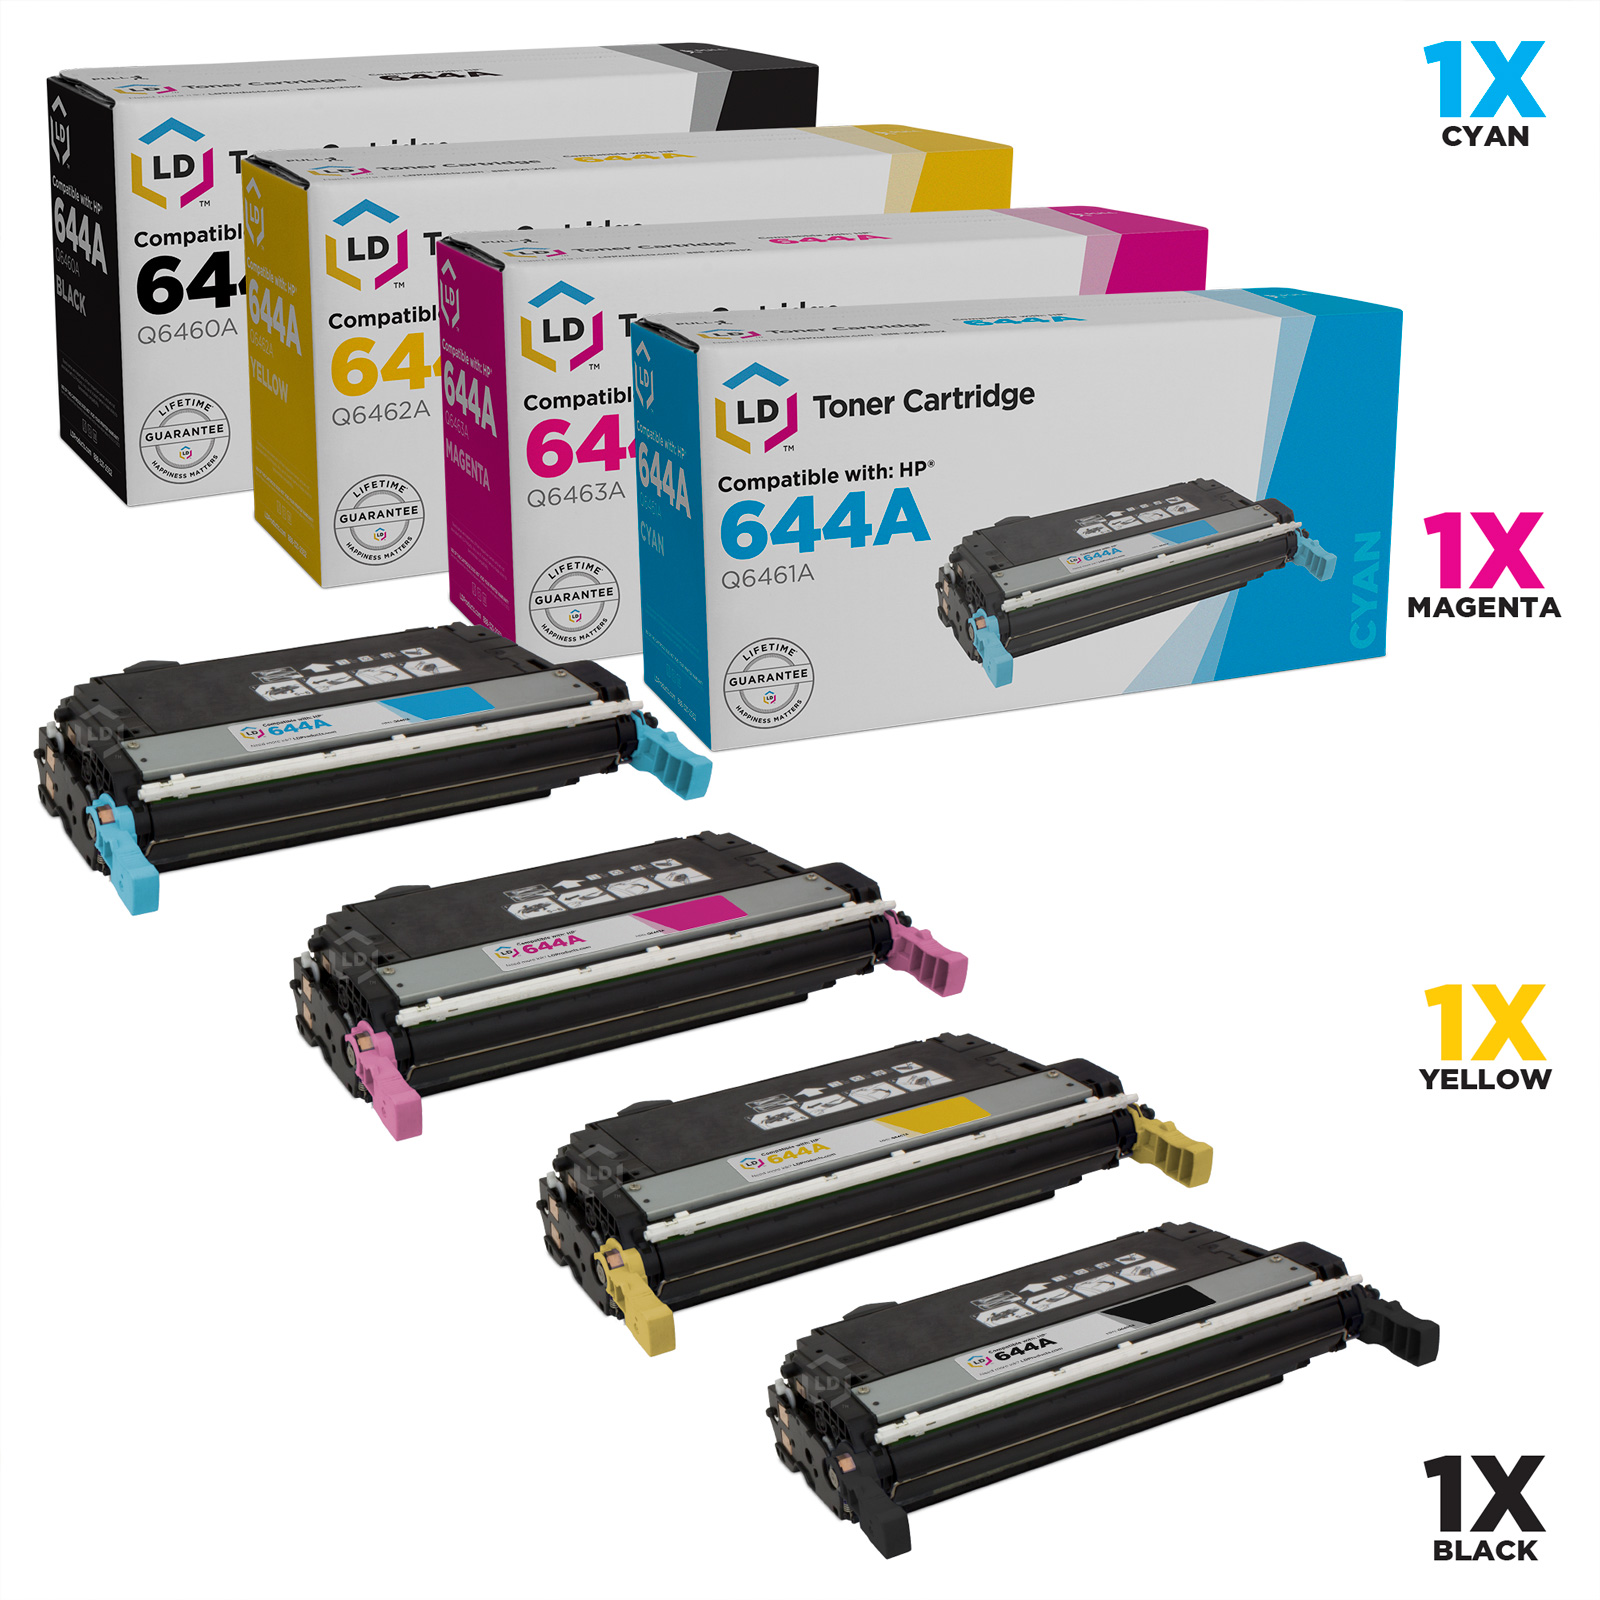 LD Remanufactured Replacement Laser Toner Cartridges for HP Color LaserJet 4730: 1 Black Q6460A, 1 Cyan Q6461A, 1 Magenta Q6463A and 1 Yellow Q6462A - image 1 of 1